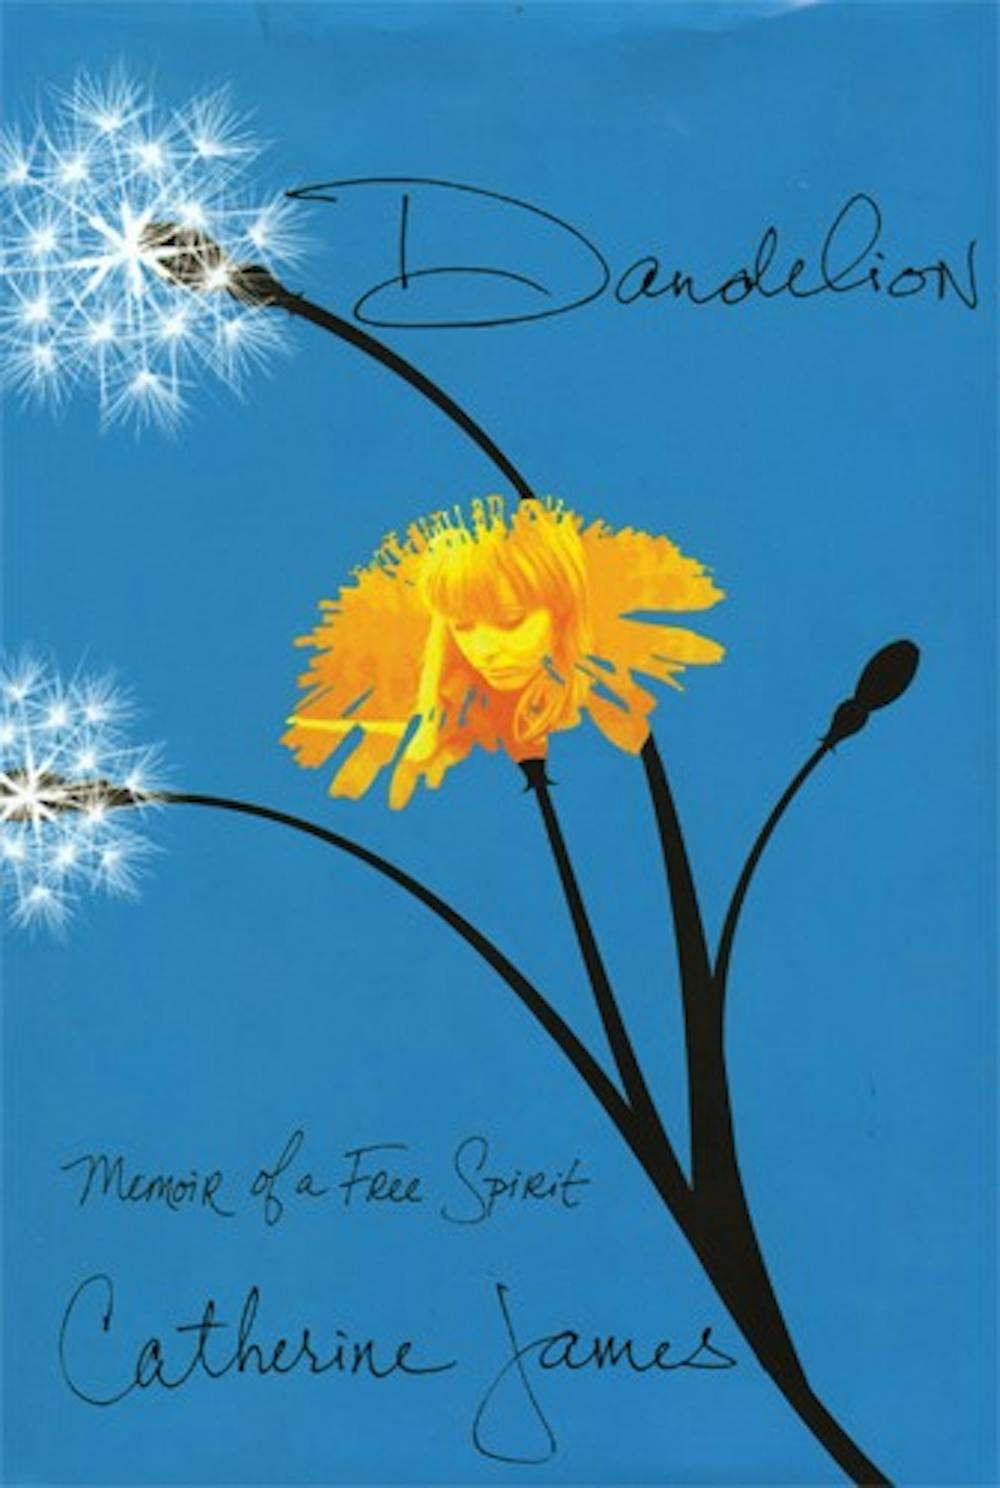 Dandelion: Memoir of a Free Spirit, follows Catherine James through her difficult childhood and into a celebrity-studded life in the 60's. 